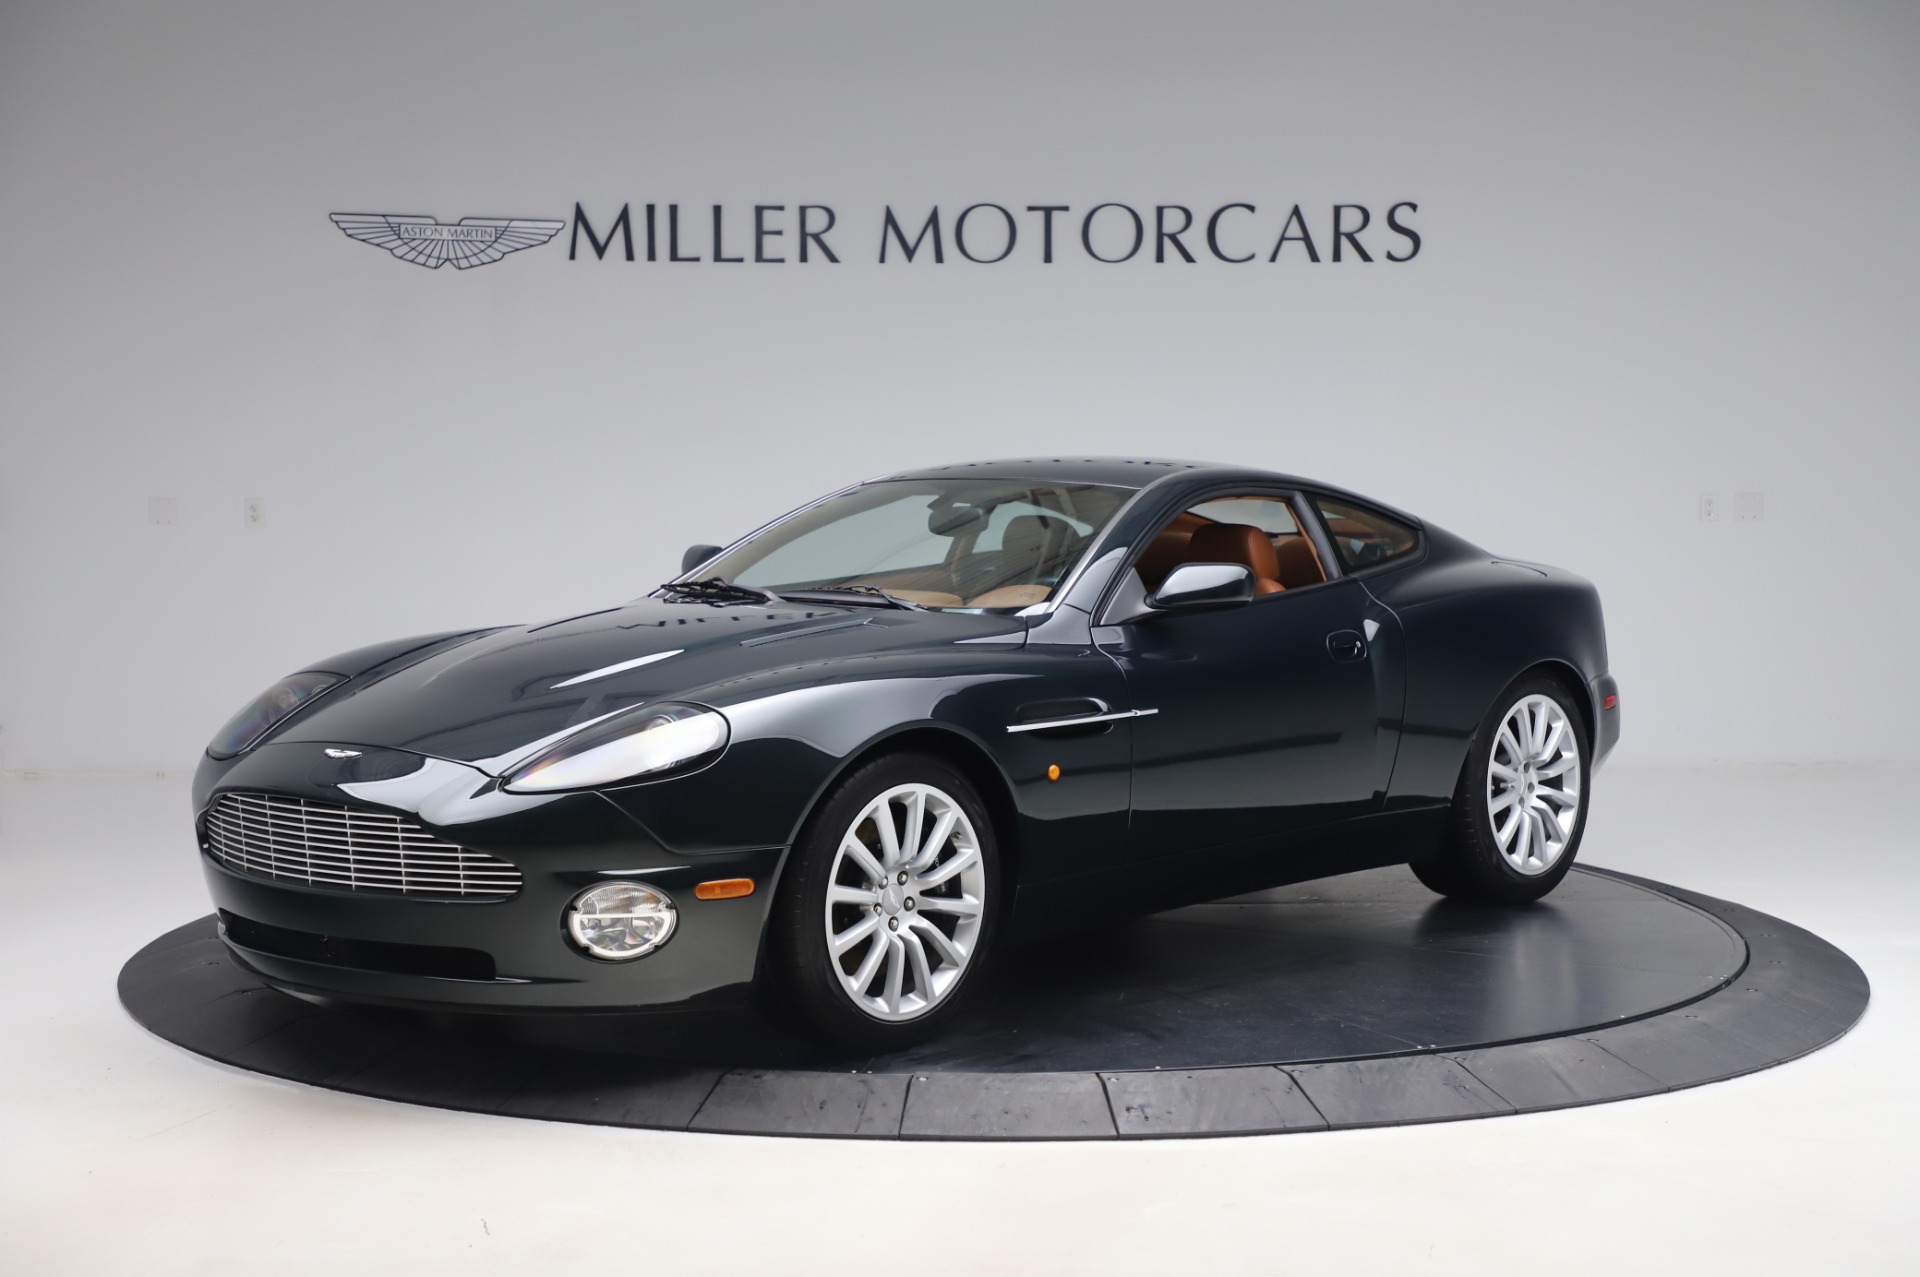 Used 2003 Aston Martin V12 Vanquish Coupe for sale Sold at Maserati of Westport in Westport CT 06880 1